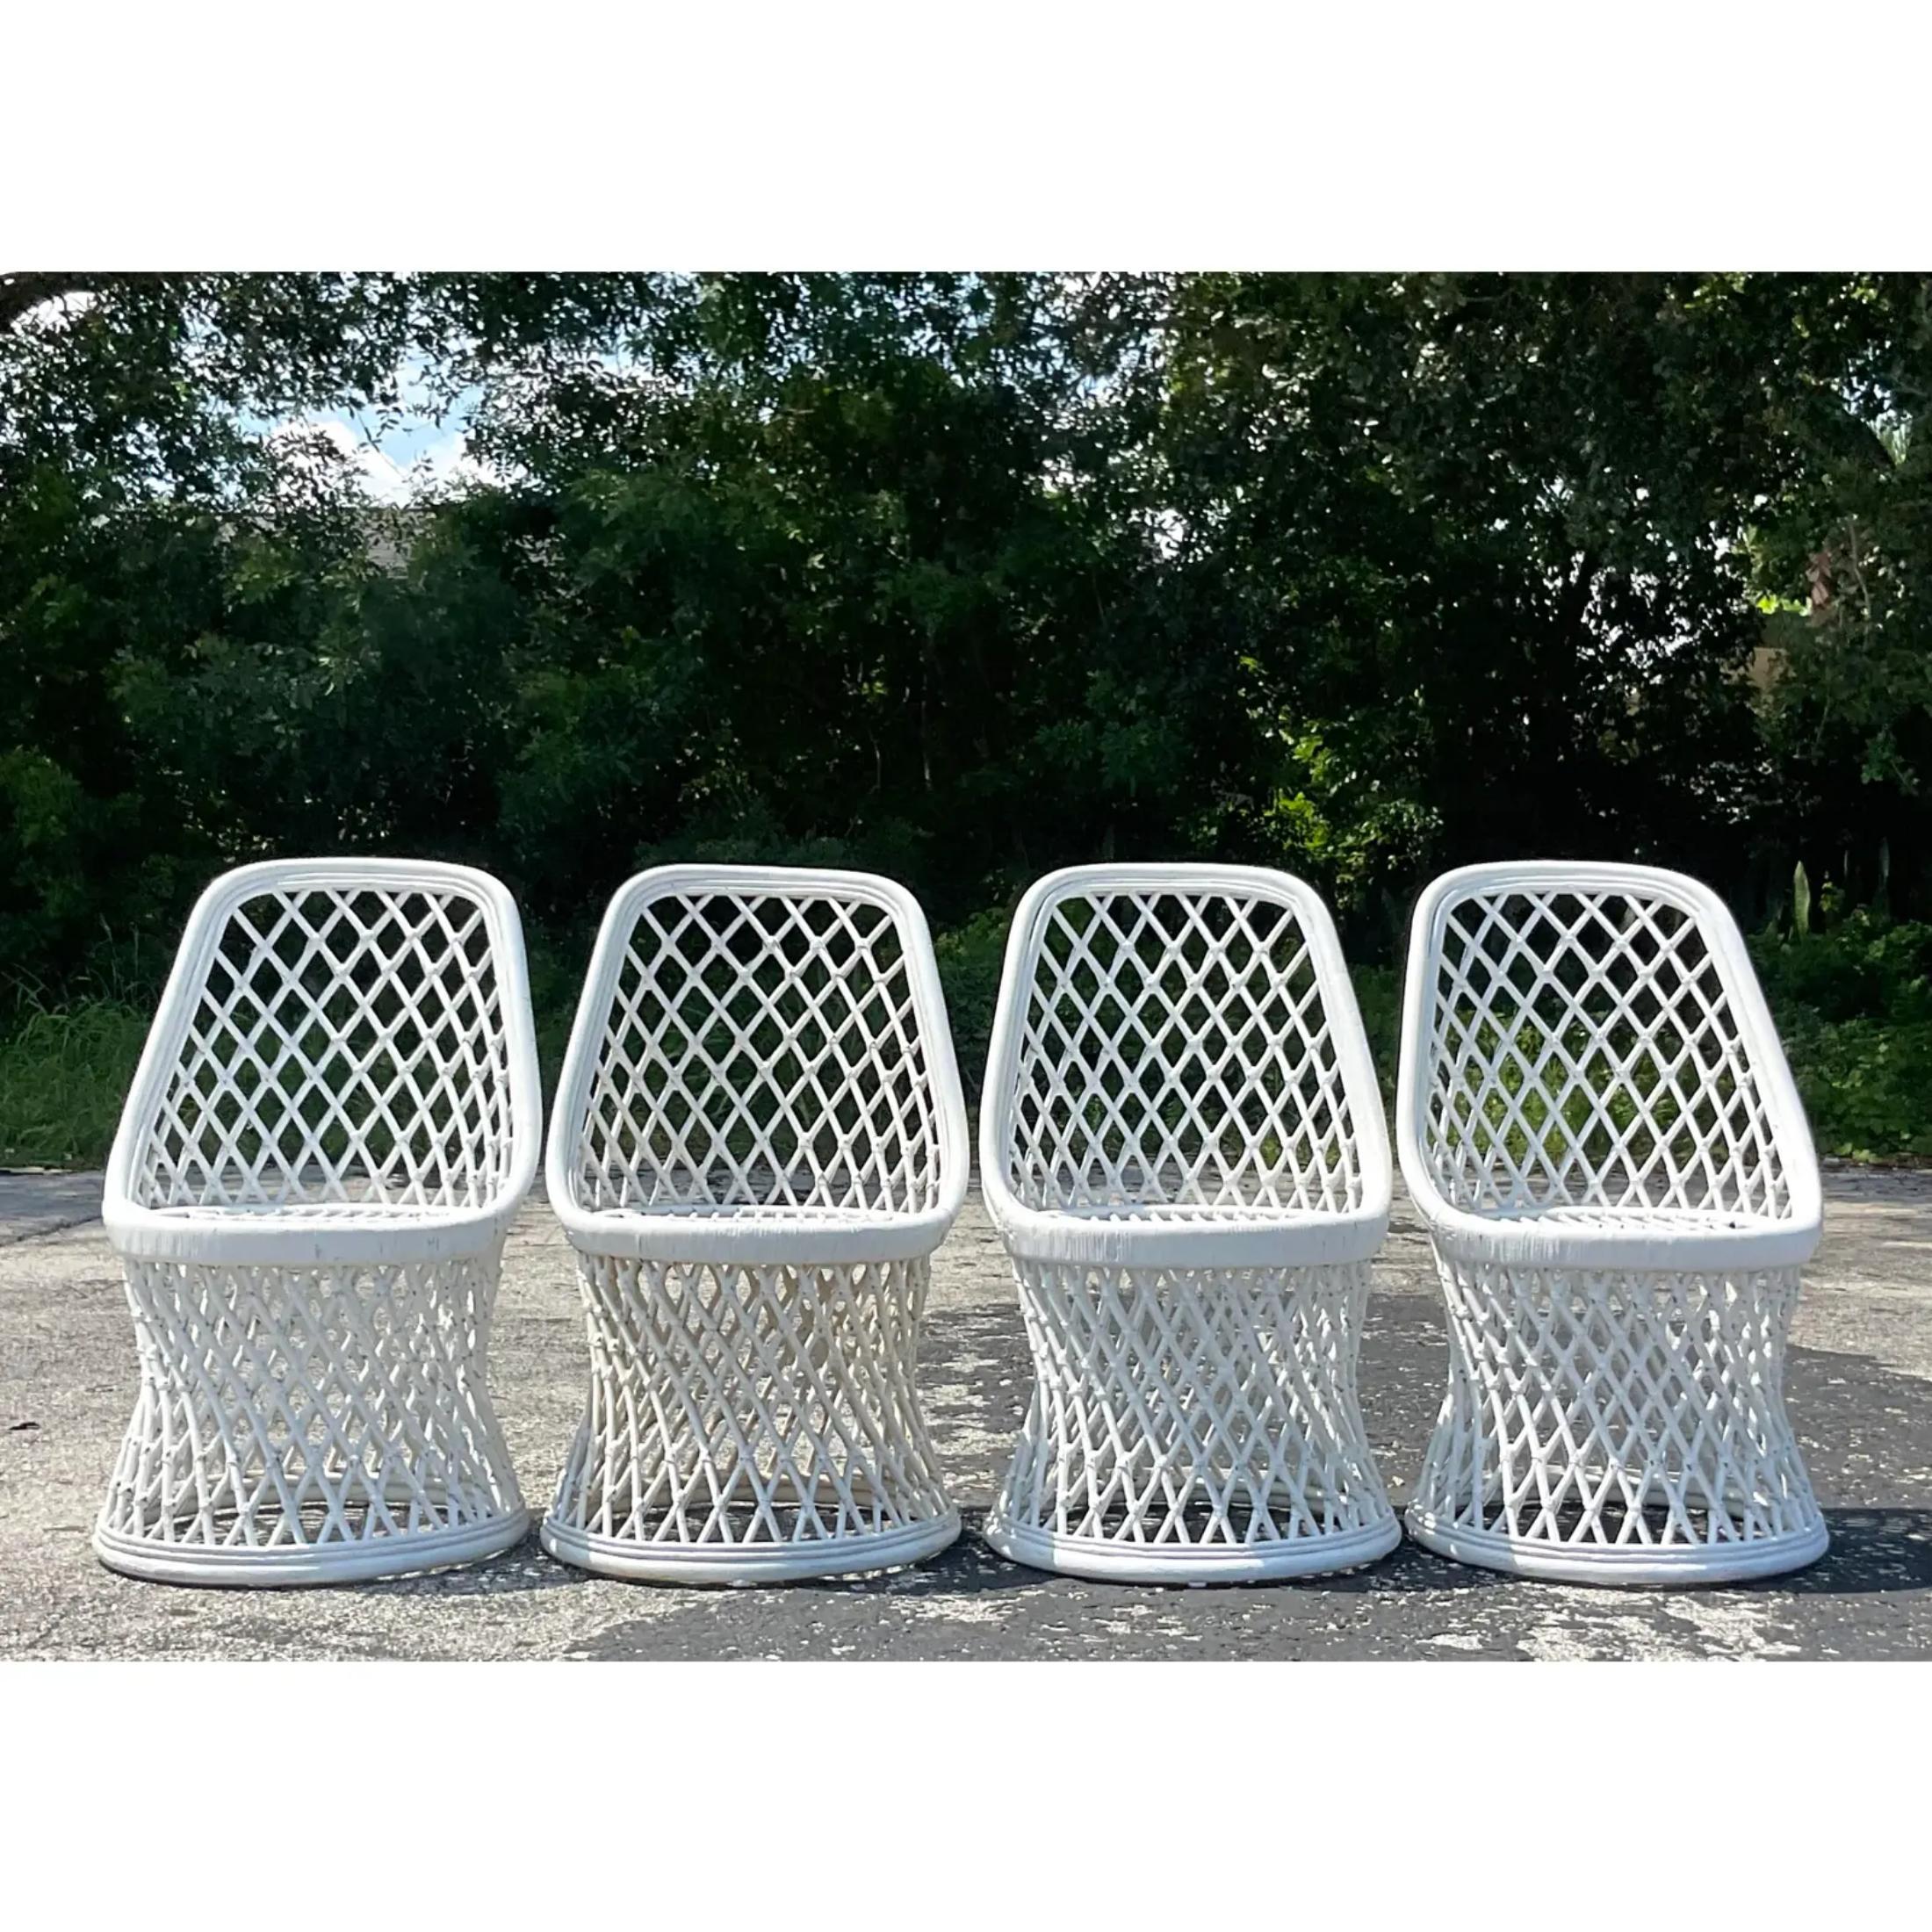 A fabulous set of vintage Coastal dining chairs. Chic woven rattan in a trellis design. Acquired from a Palm Beach estate.